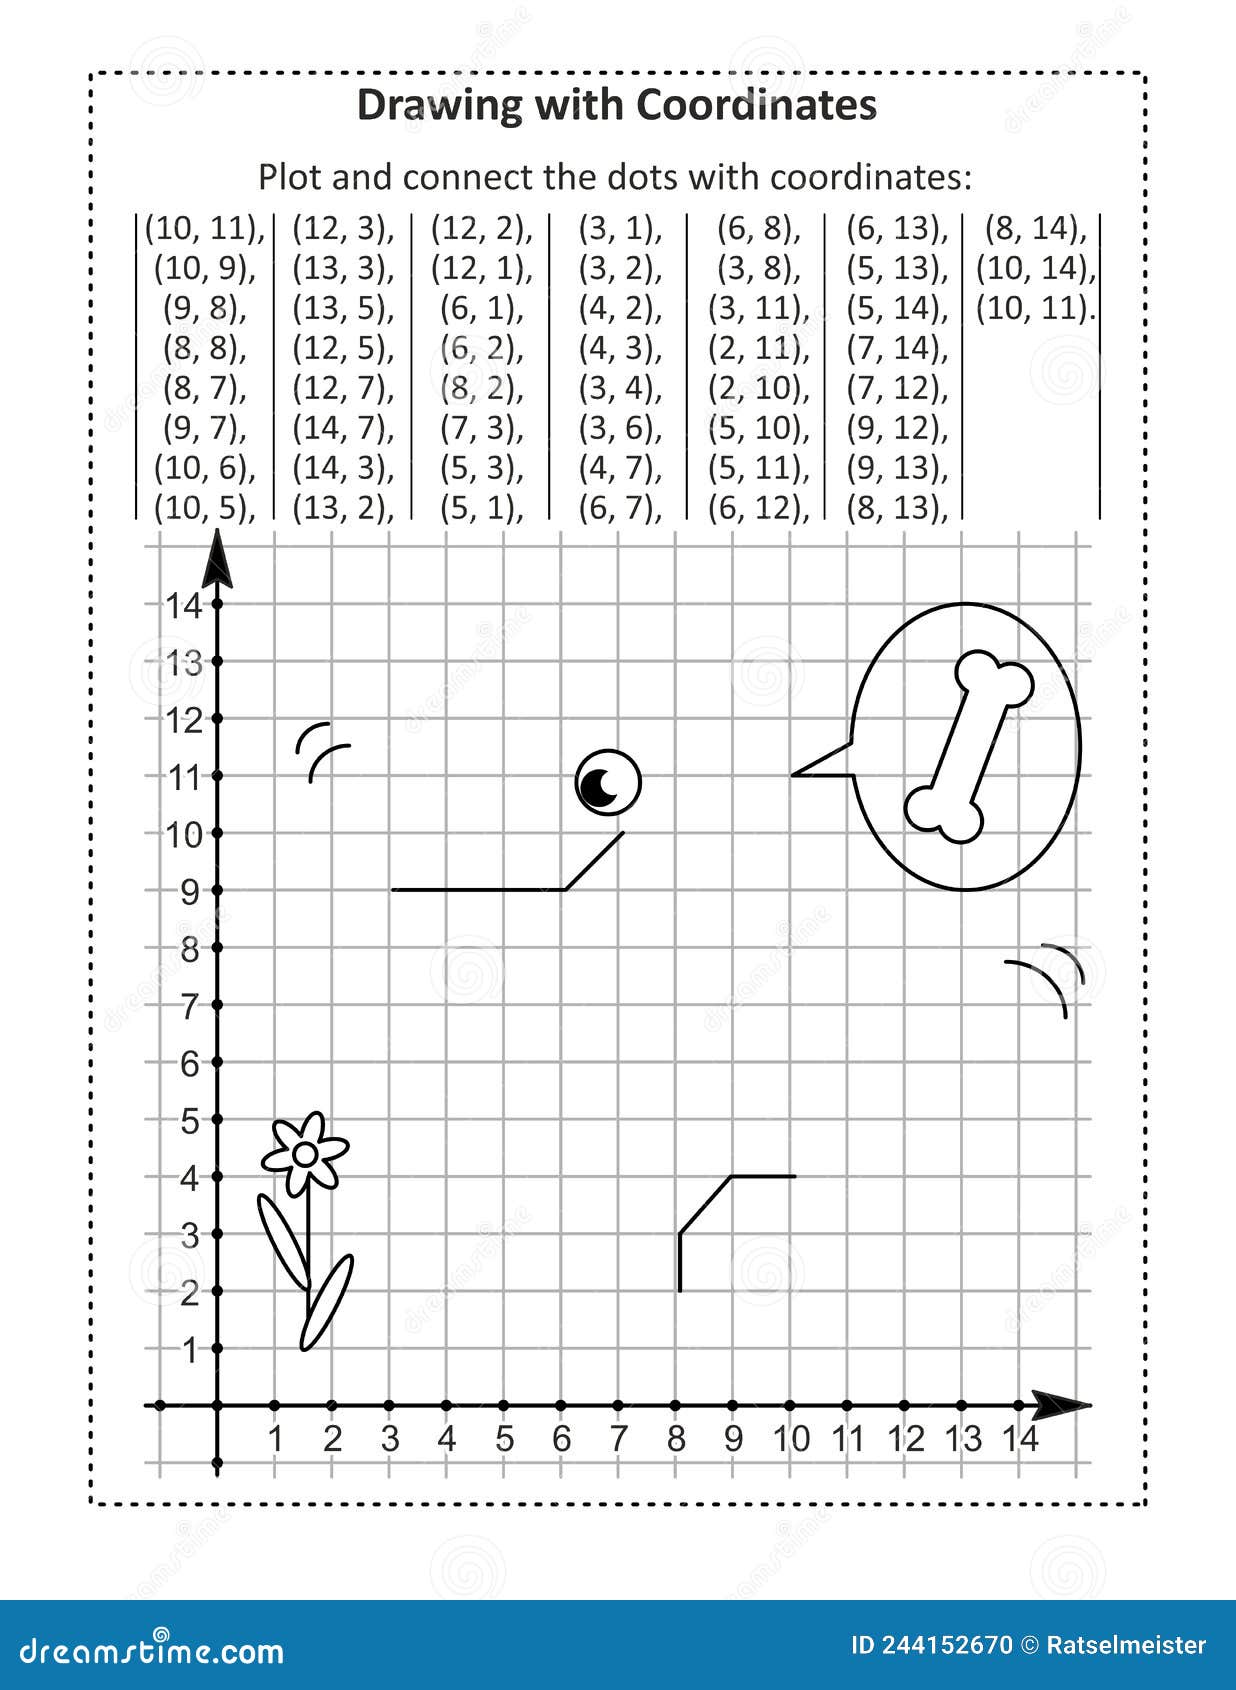 coordinate graphing, or drawing by coordinates, math worksheet with poodle dog: reveal the mystery picture by plotting and connect